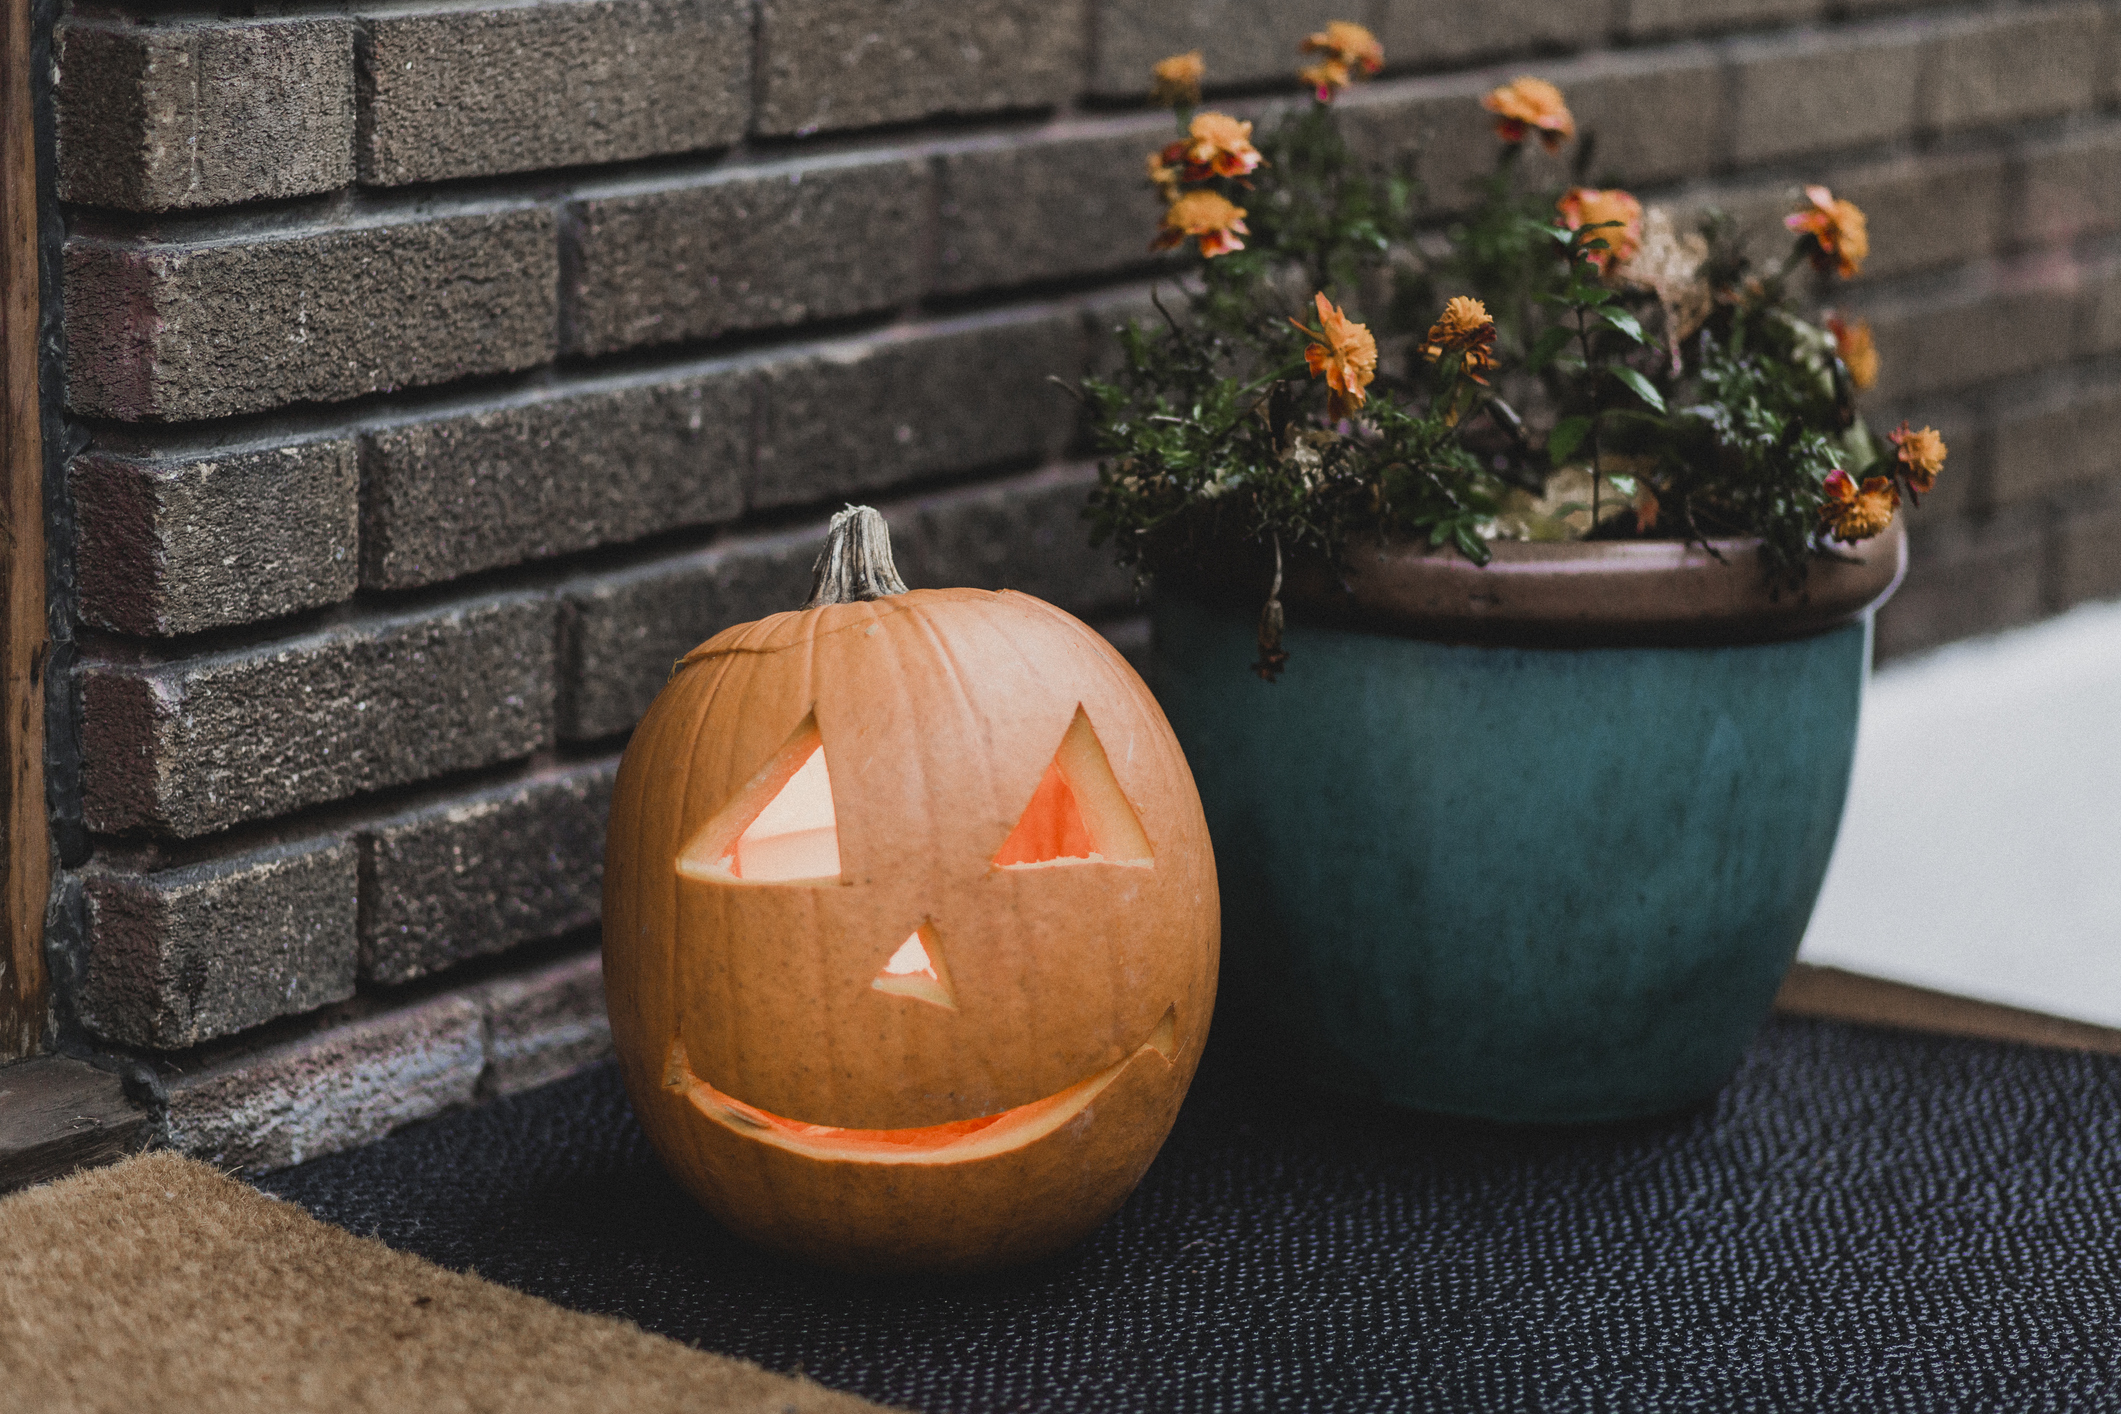 14 Tips + Ideas for Decorating Your Home for Halloween